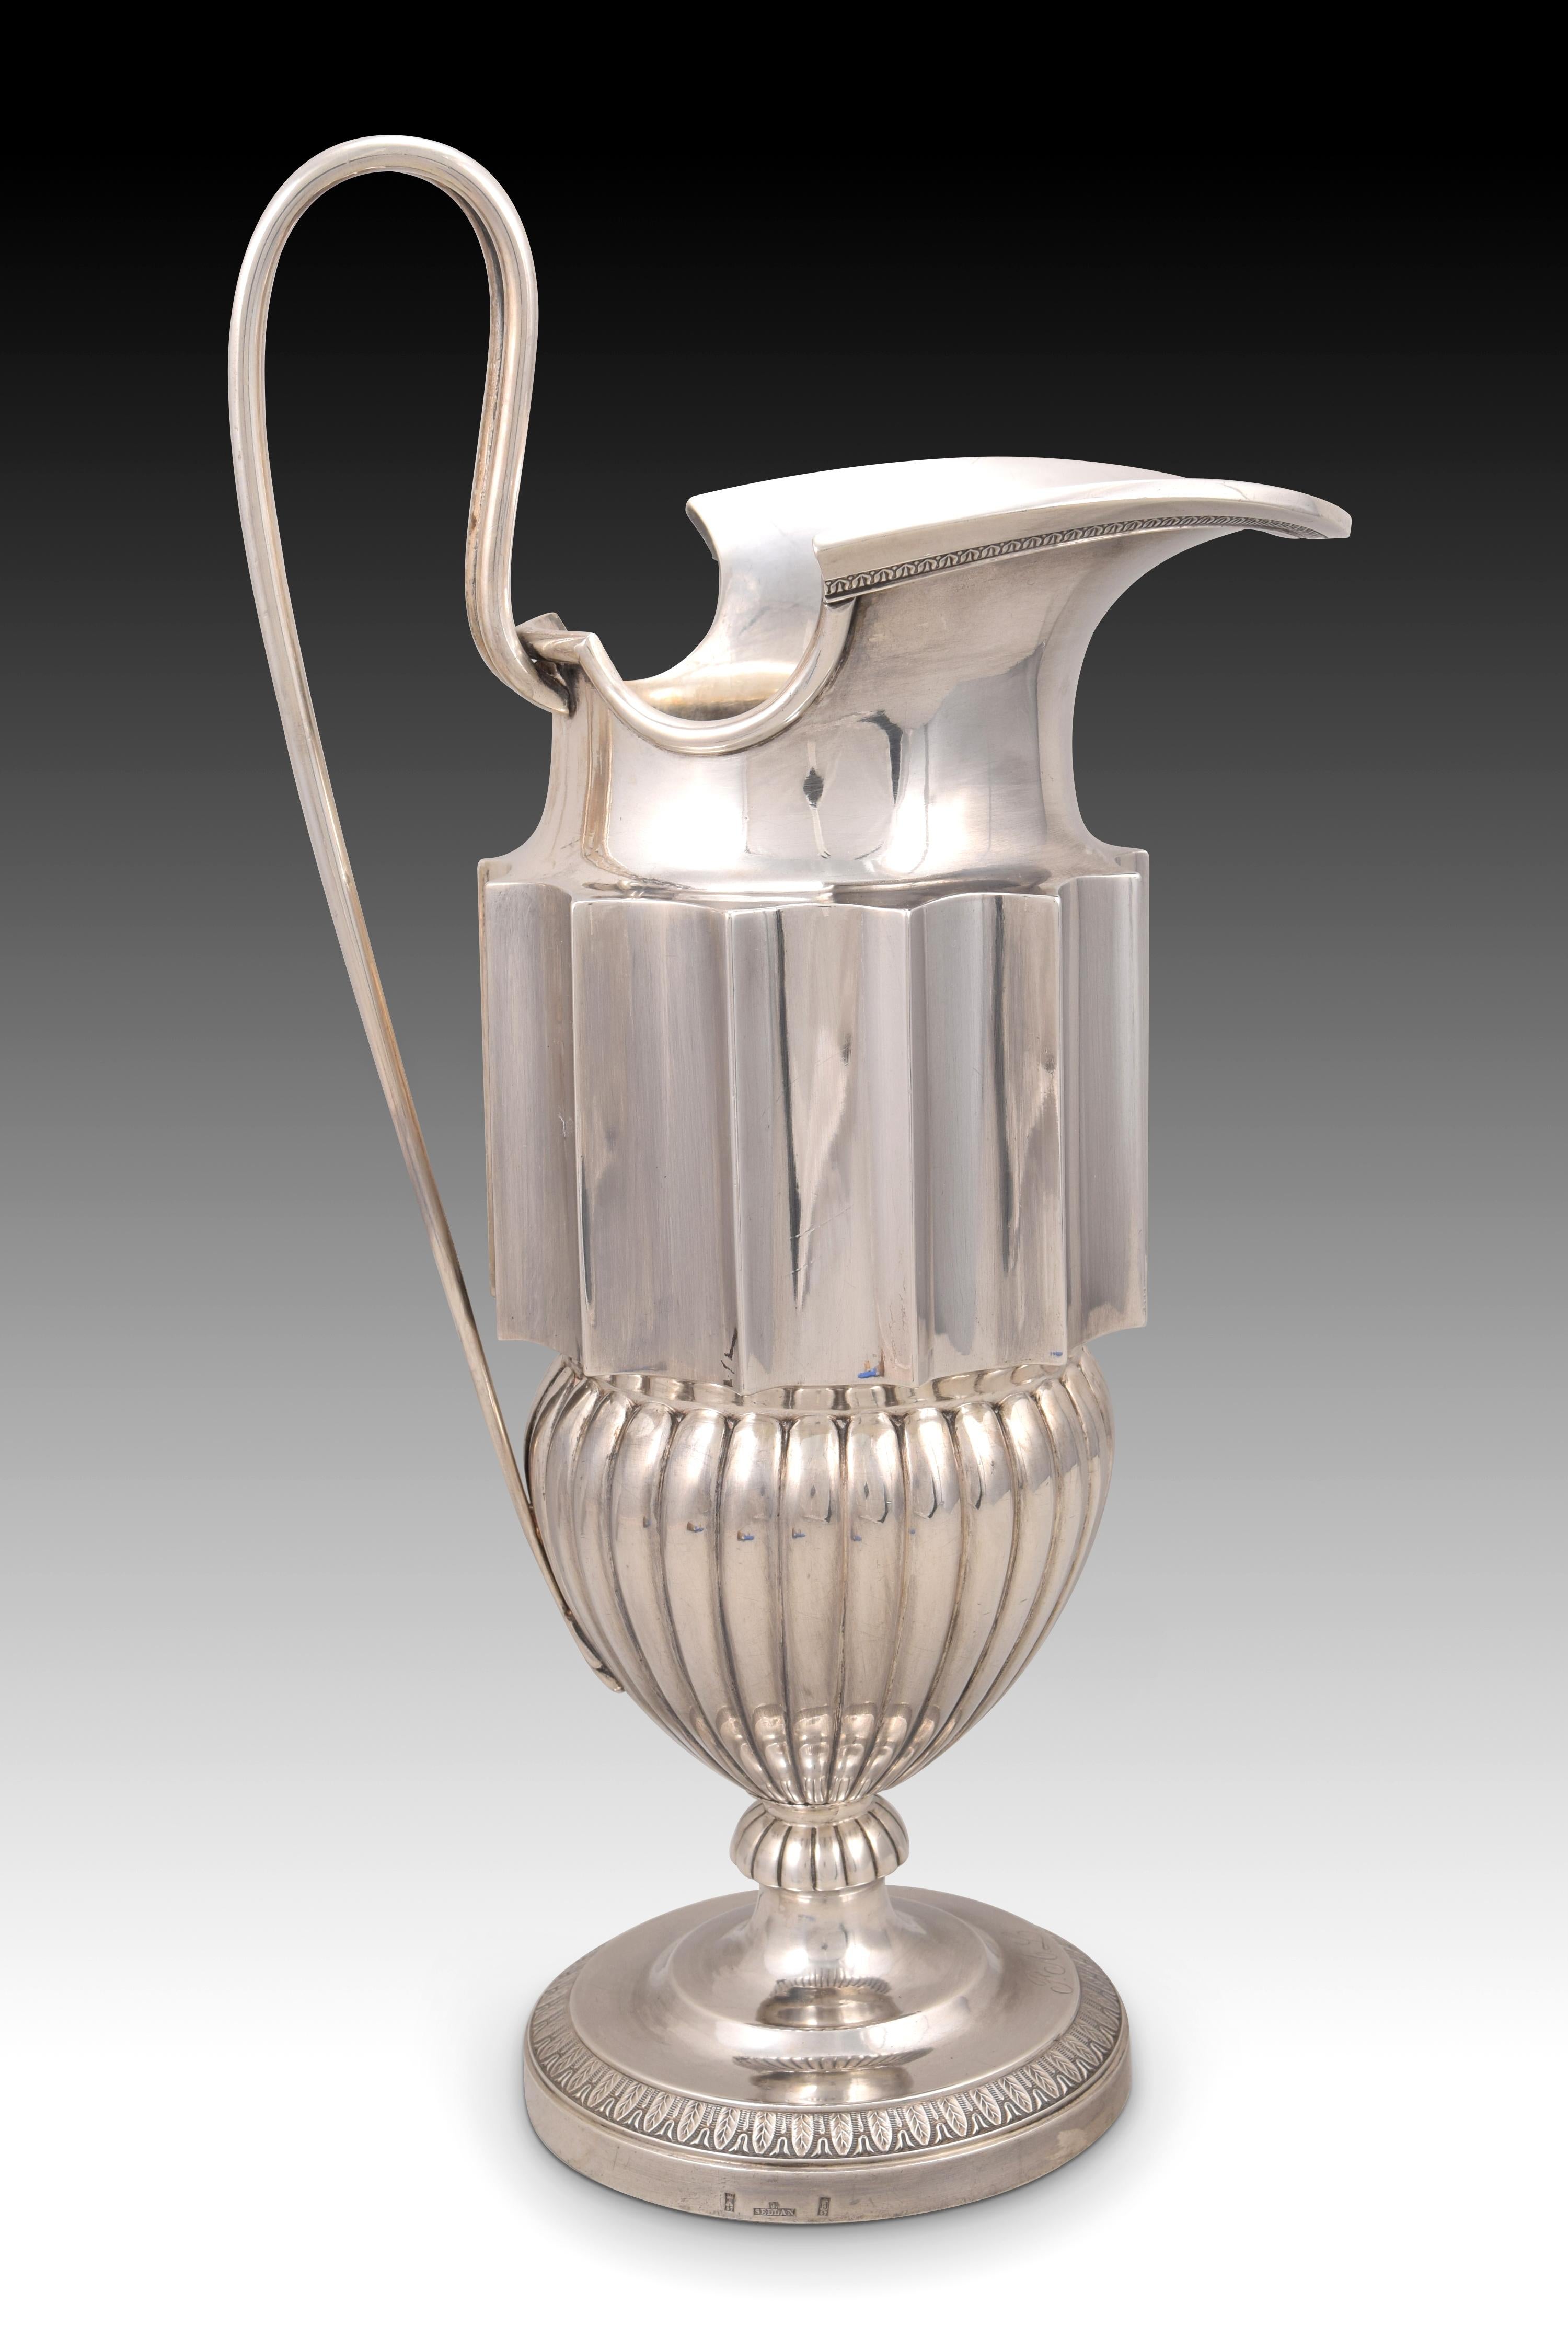 Jug. Silver. SELLAN, Juan. Madrid, 1847. 
With contrast markings. 
Silver pitcher in its color that has a flat handle decorated with simple openwork plant elements between two smooth bands and an upward shape, a large mouth extended forward, and a